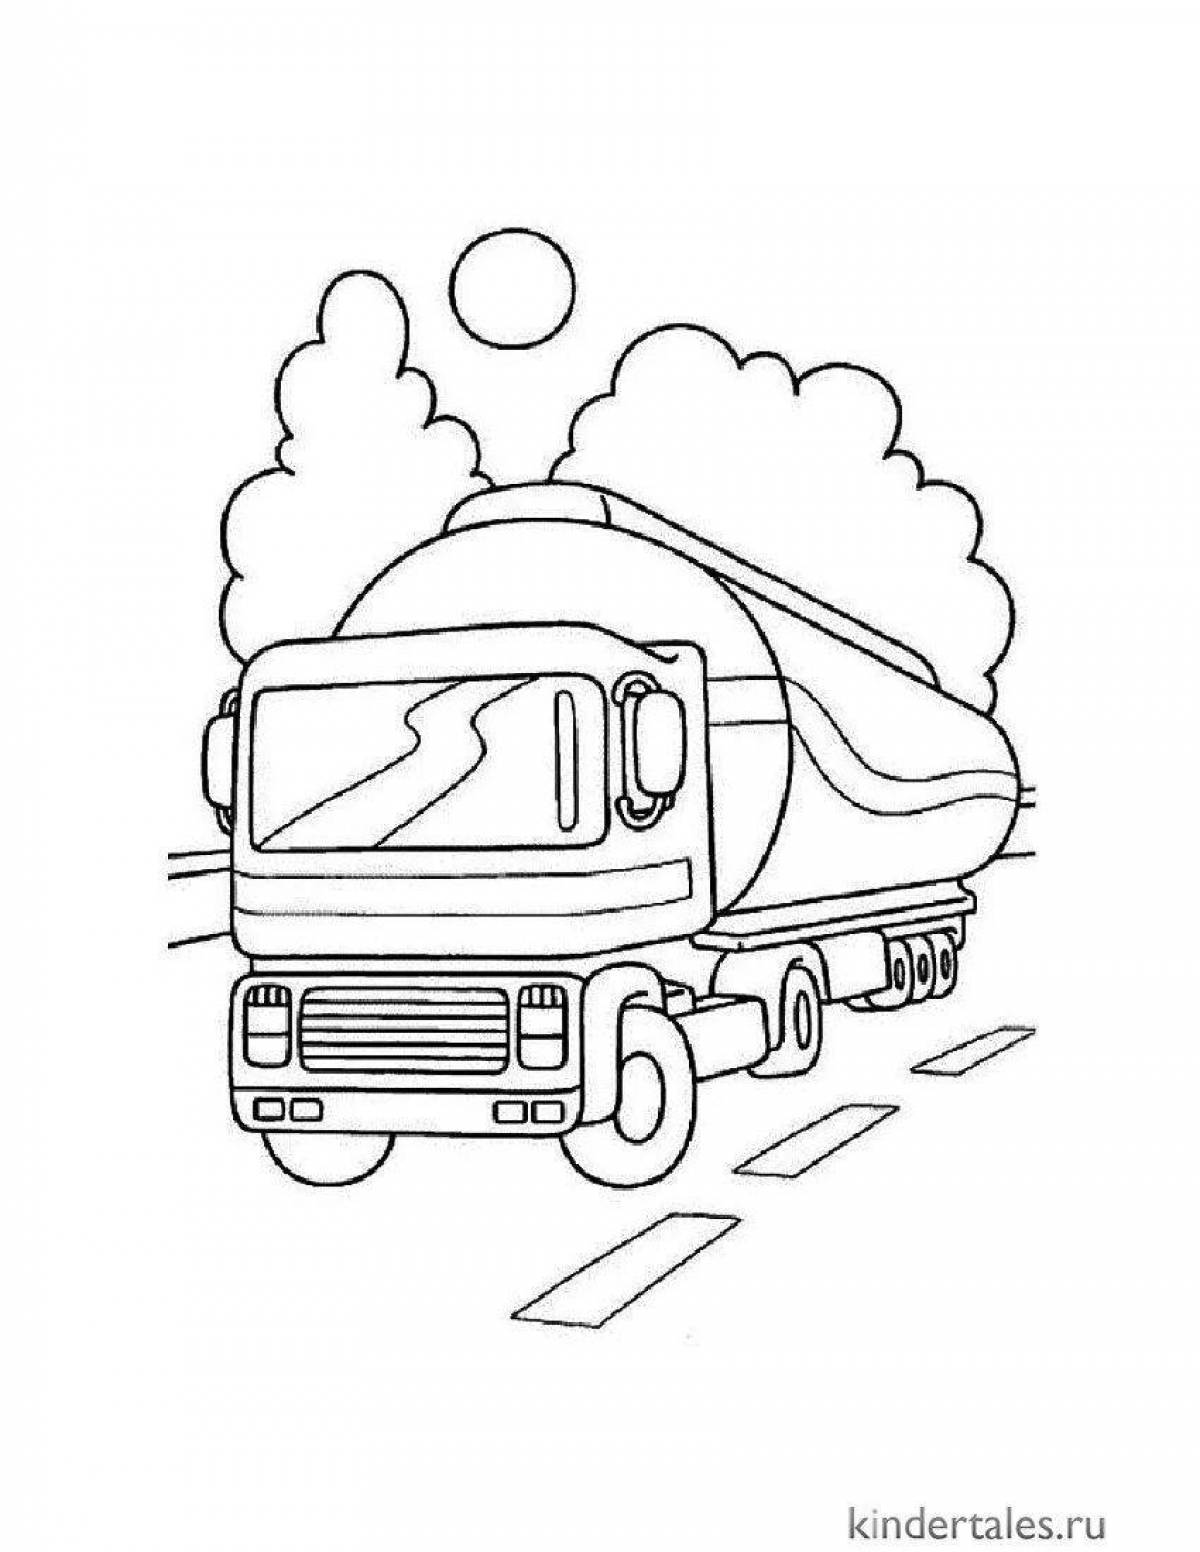 Fabulous sewer car coloring page